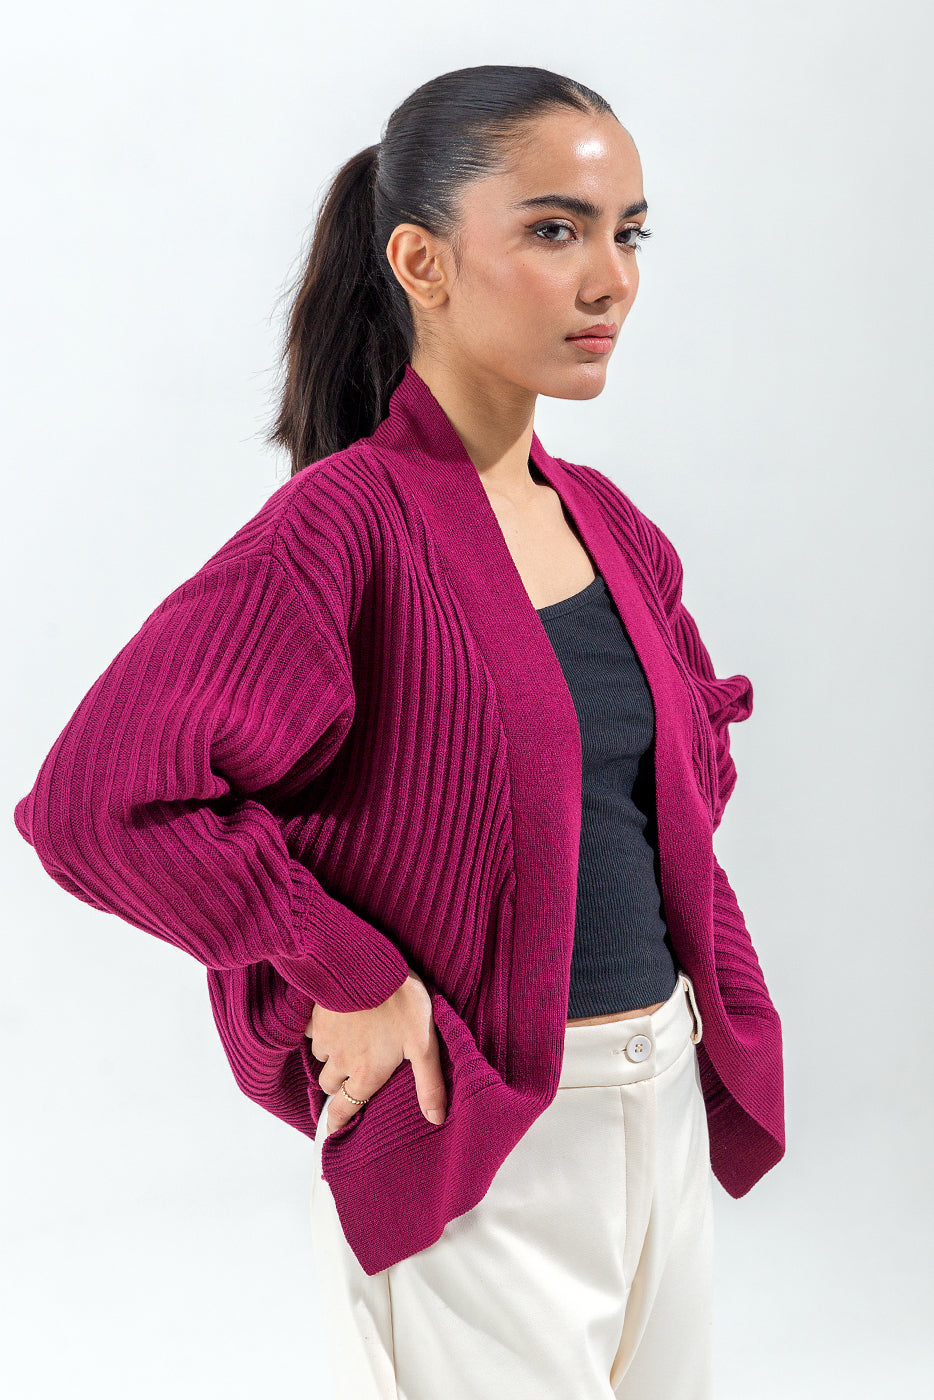 Knitted Shrug - BEECHTREE